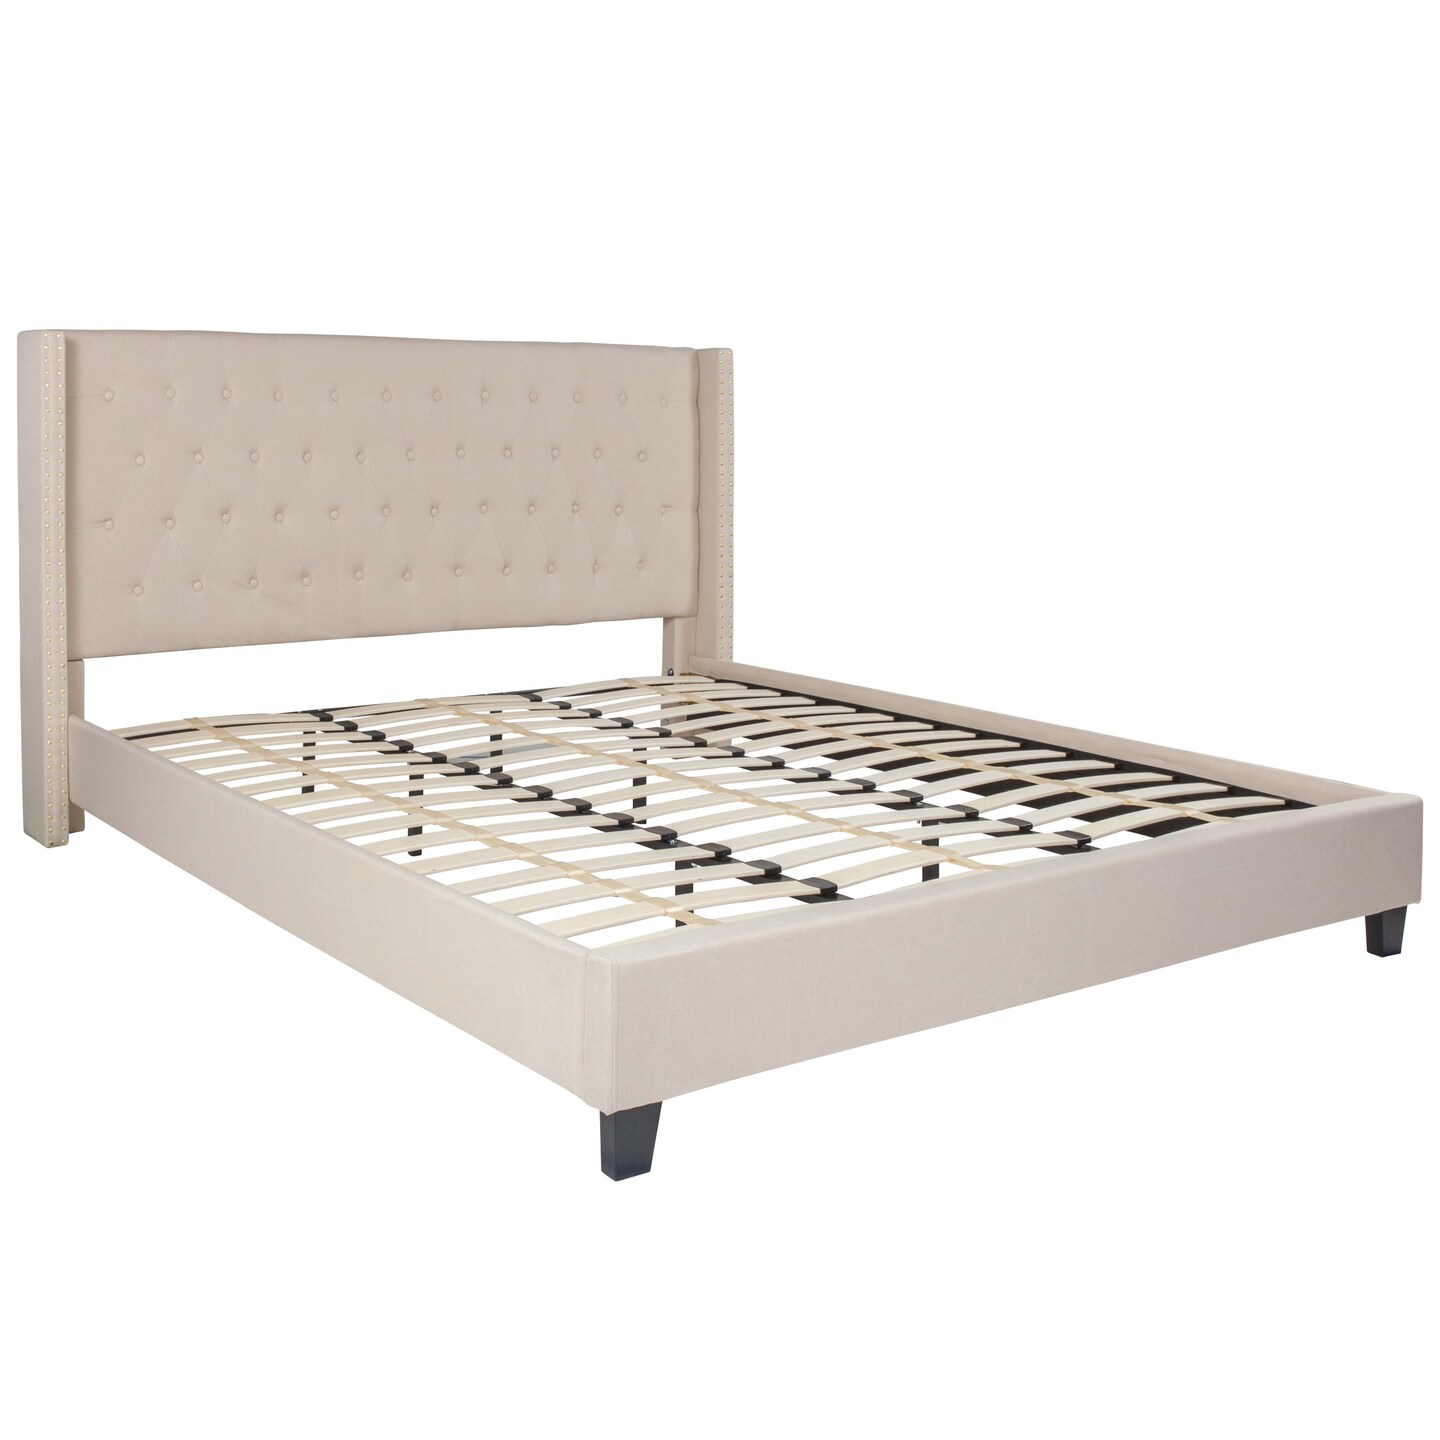 Merrick Lane Chenoa Upholstered Platform Bed with Button Tufted Headboard